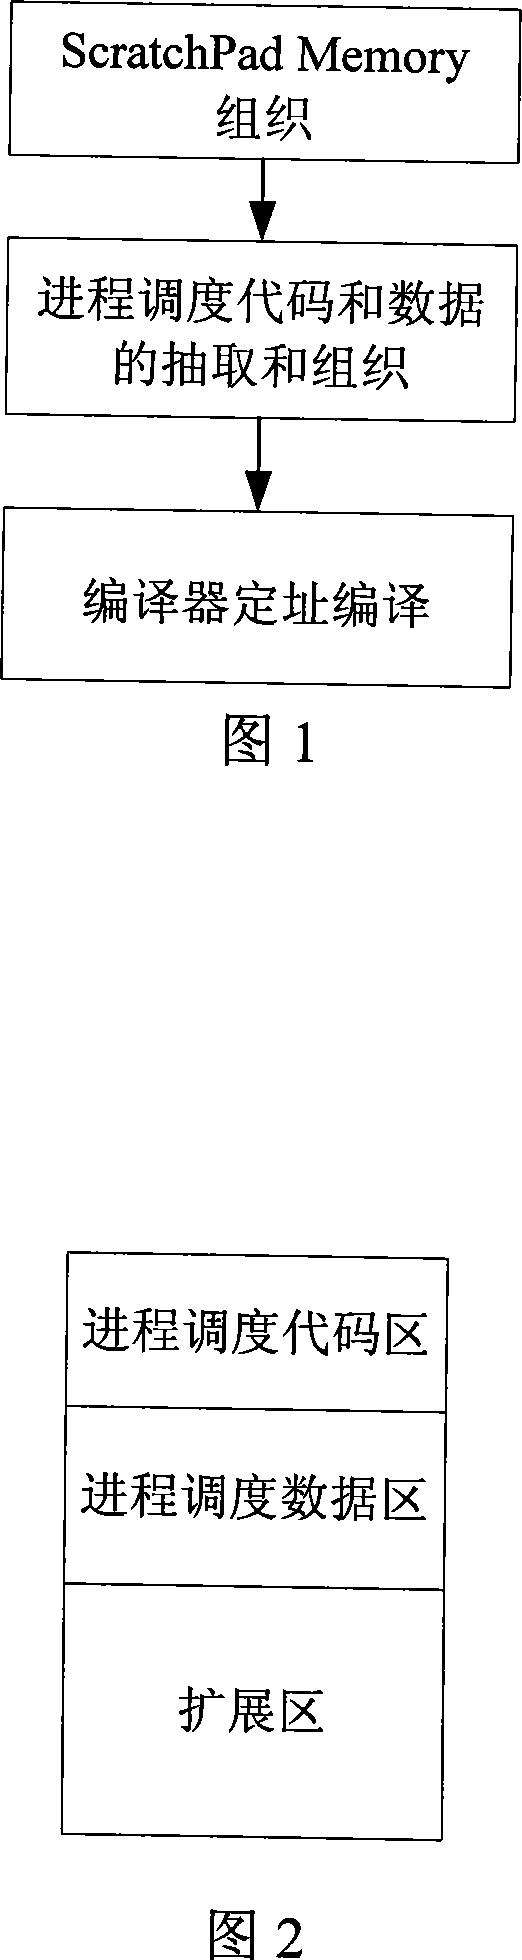 Method for optimizing embedded type operating system process scheduling based on SPM